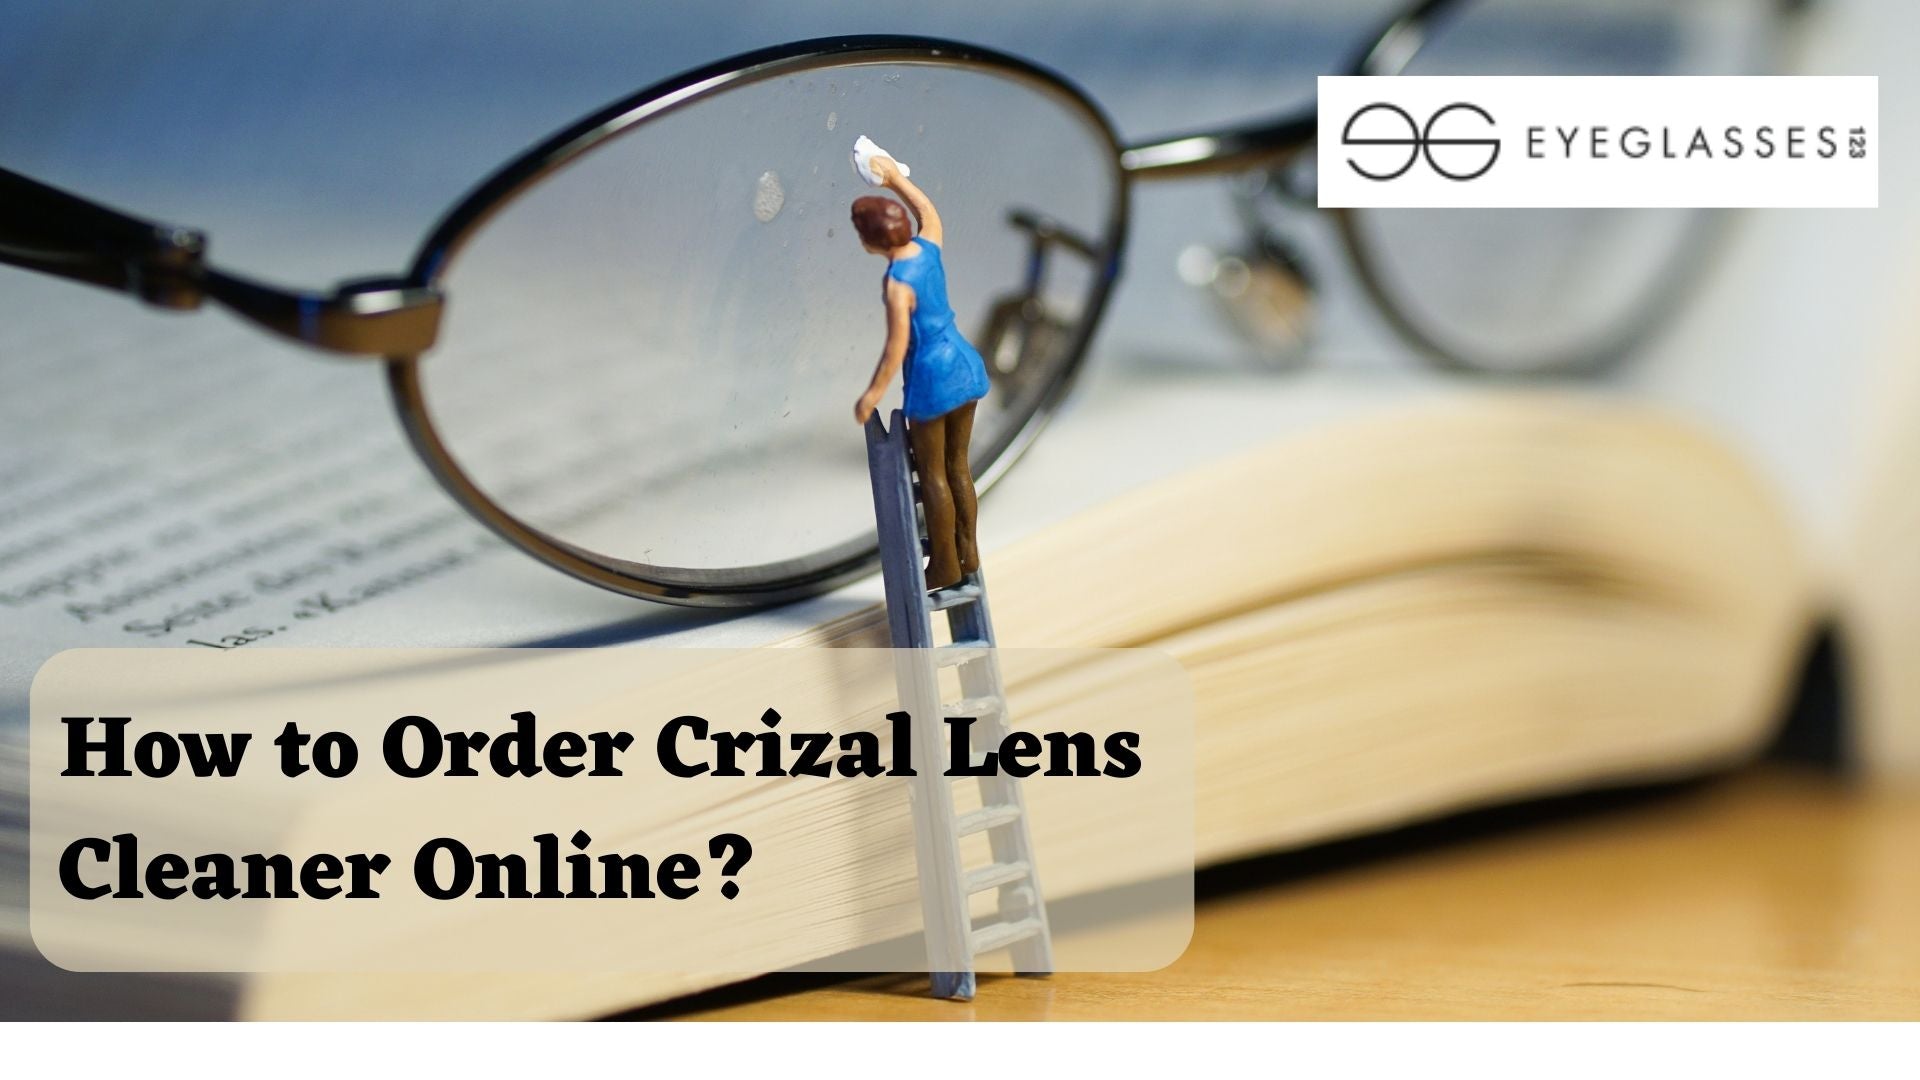 How to Order Crizal Lens Cleaner Online?